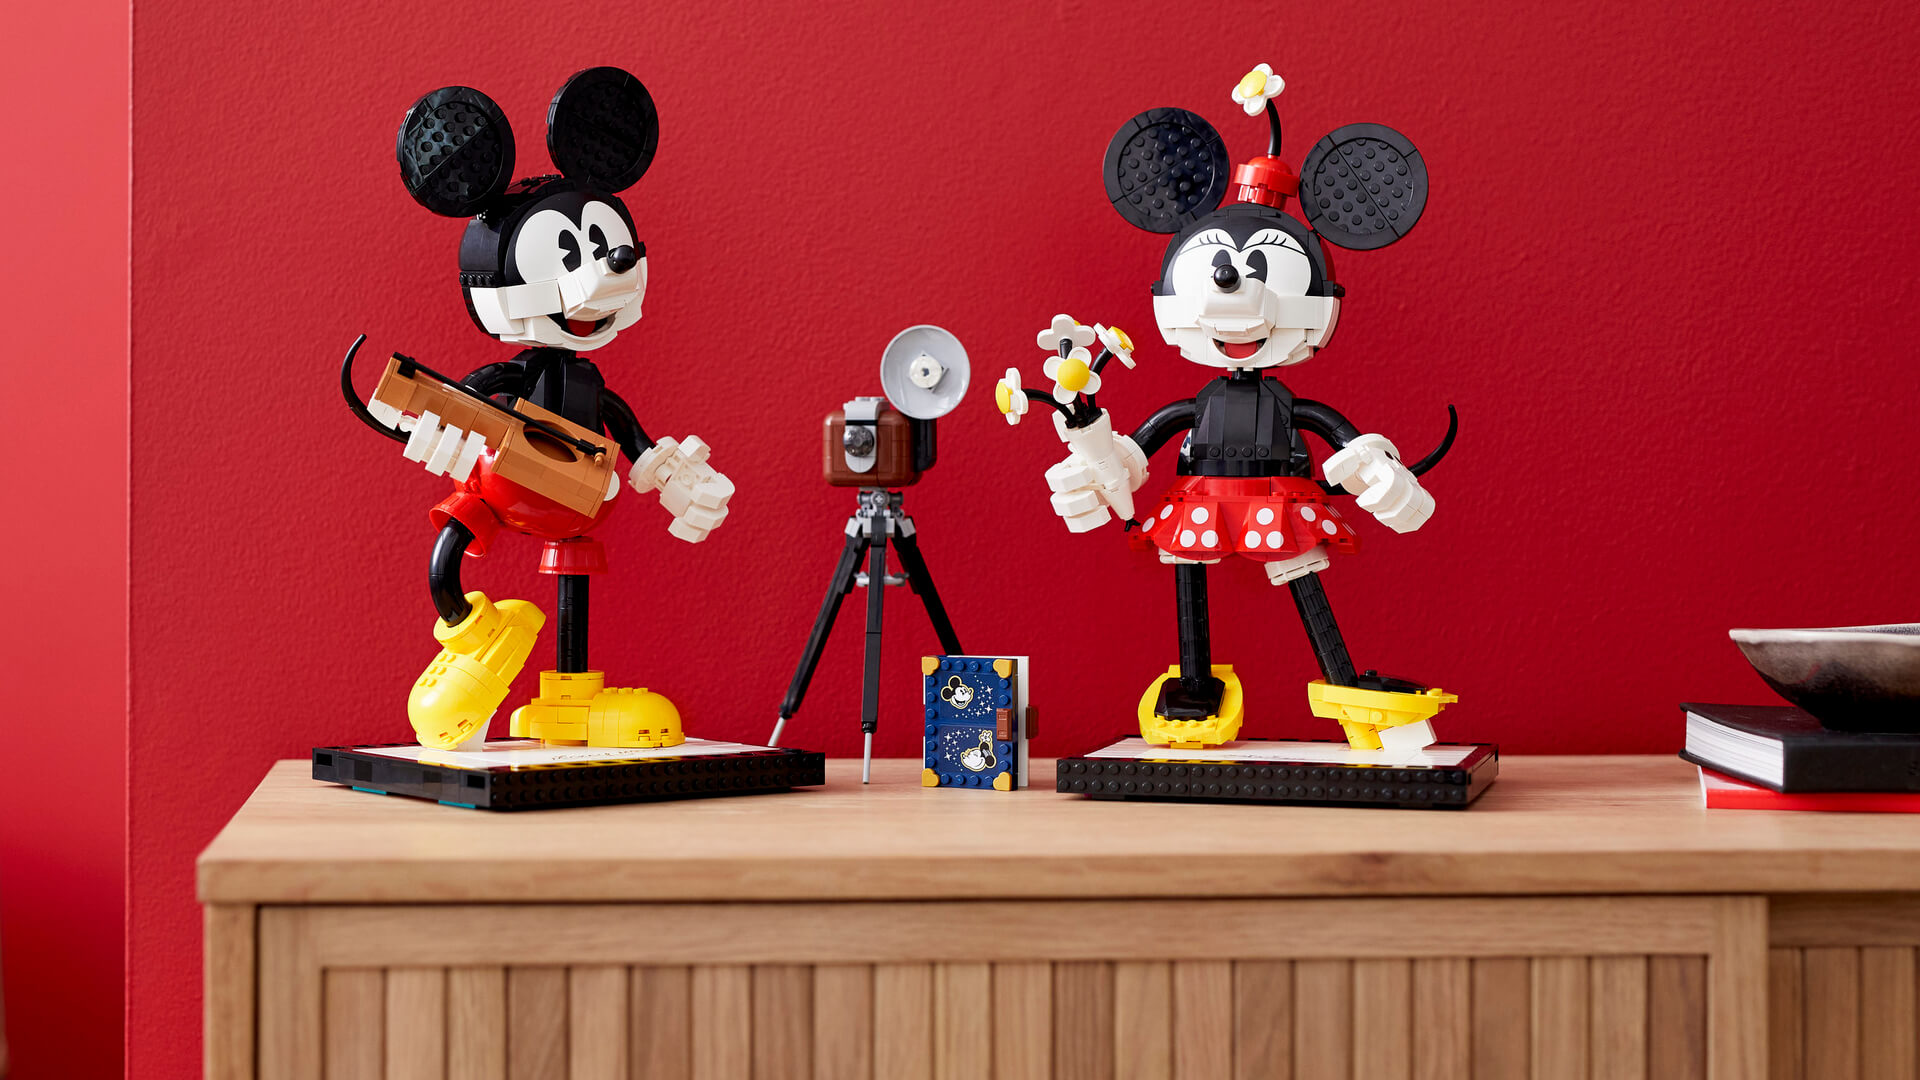 Lego Mickey and Minnie Mouse